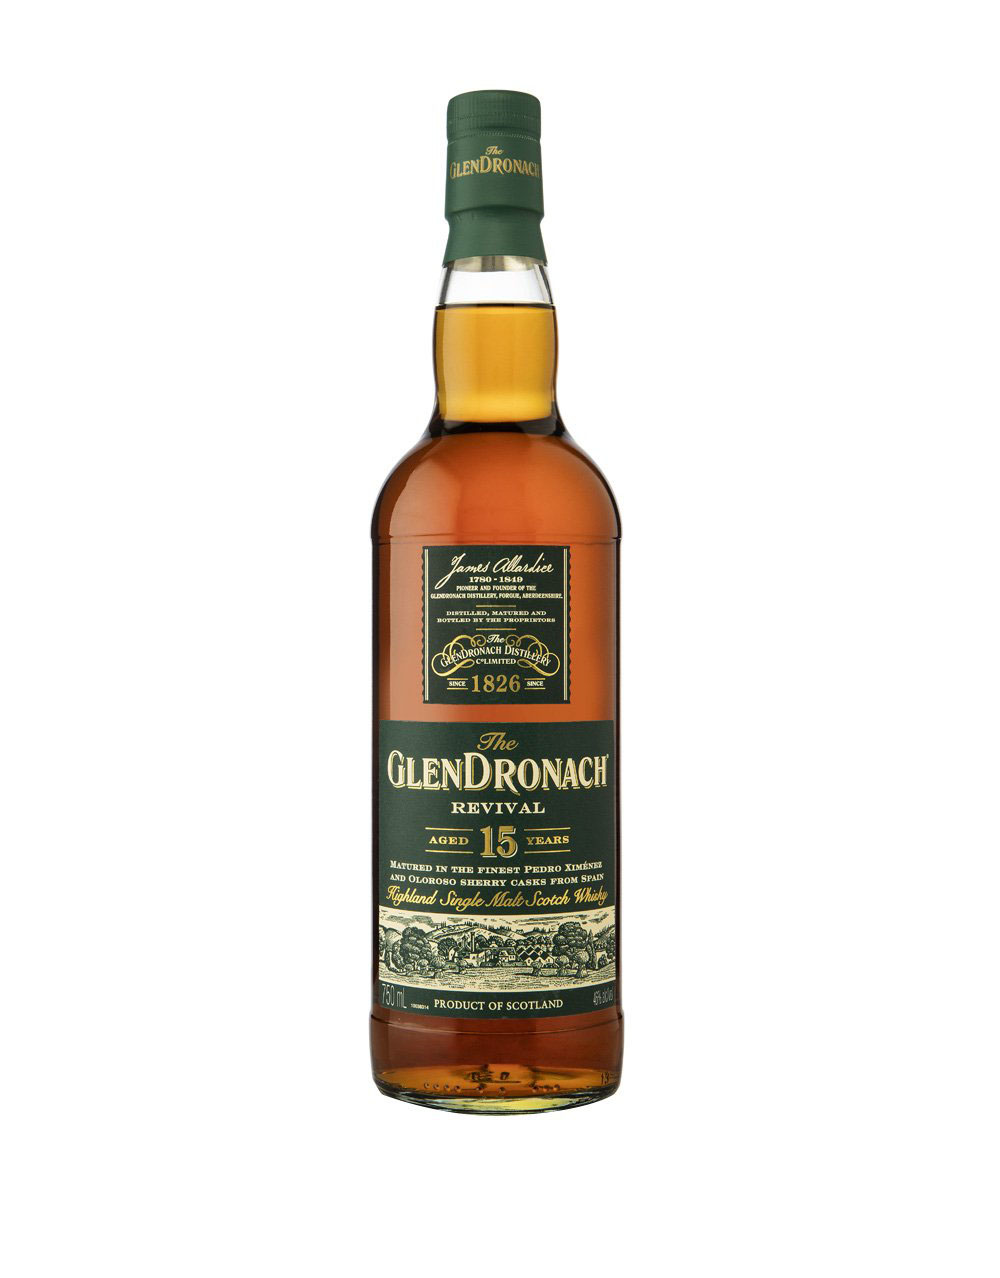 The Glendronach Revival Aged 15 Years